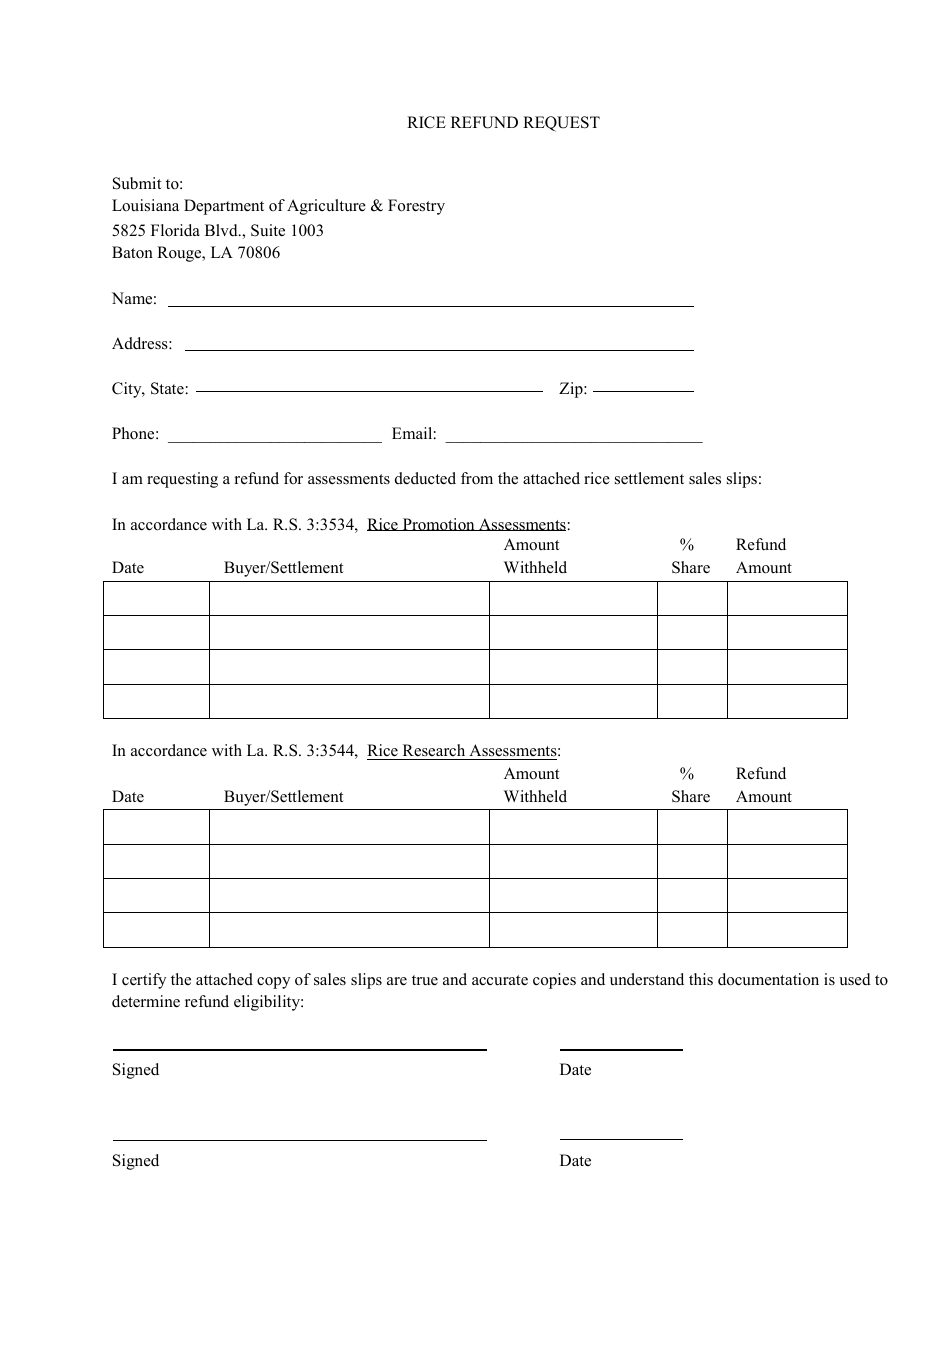 Rice Refund Request Form - Louisiana, Page 1